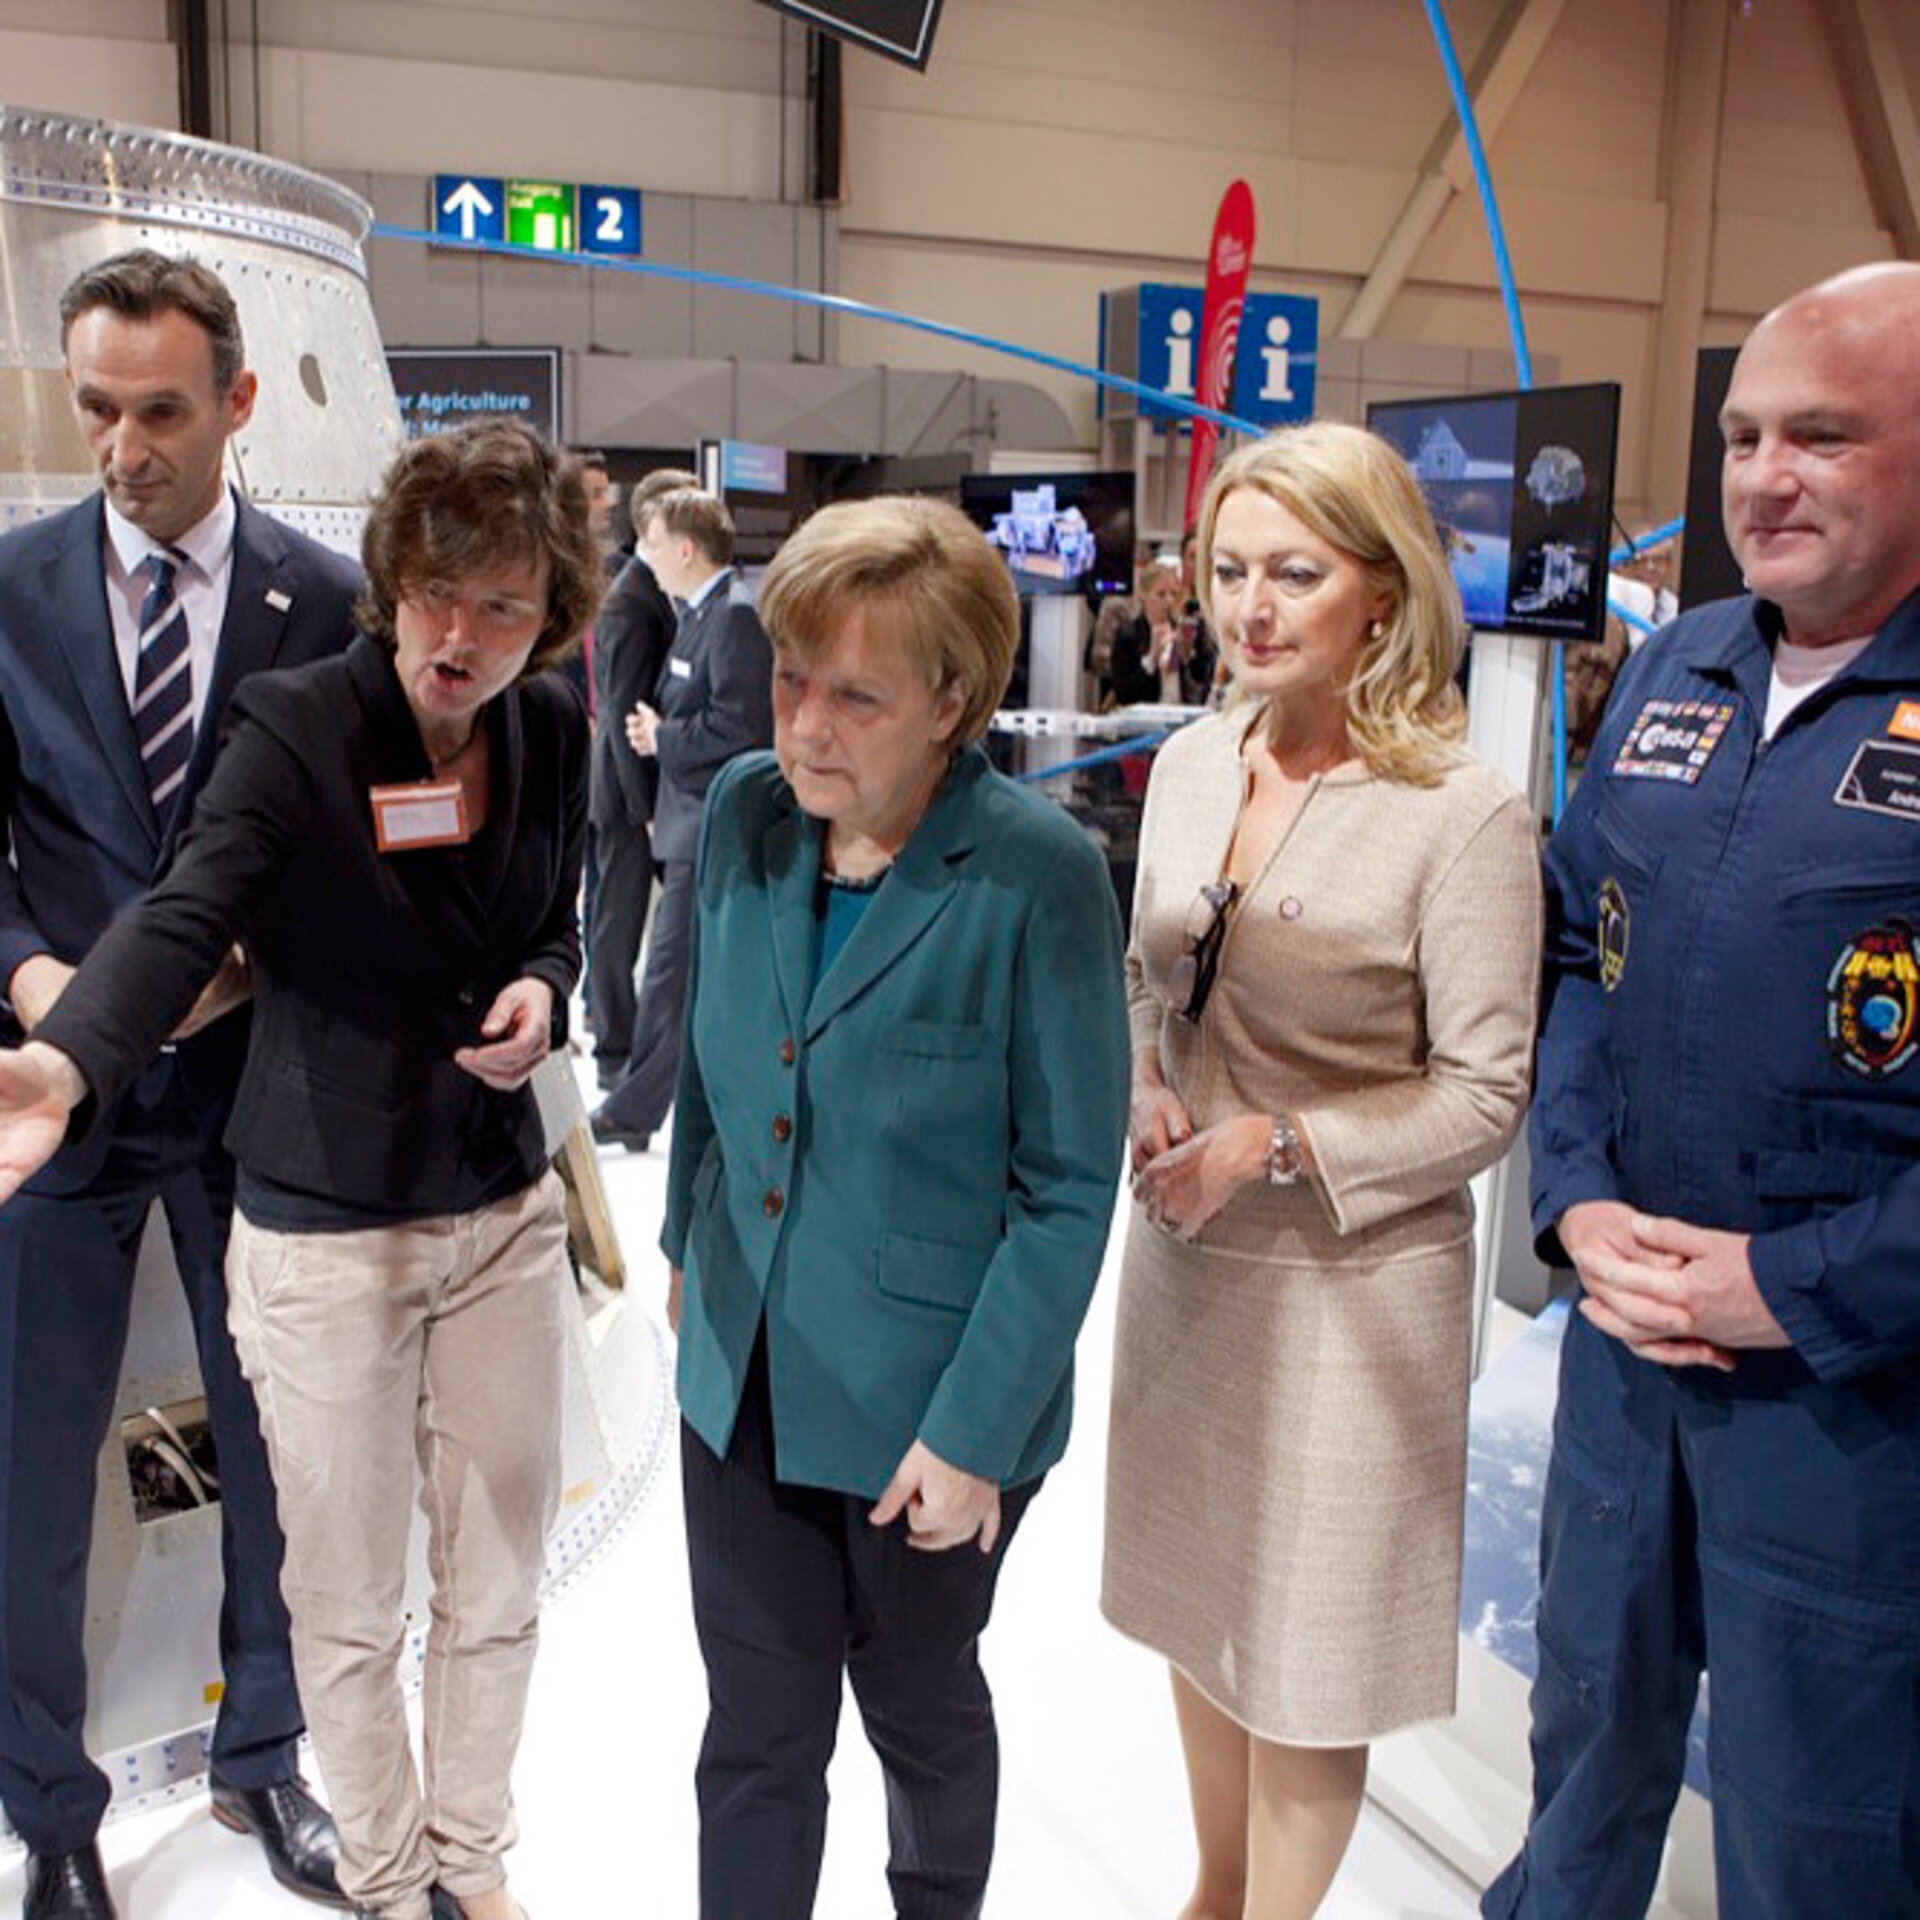 Angela Merkel and Mark Rutte visit NL Space booth at Hannover Messe